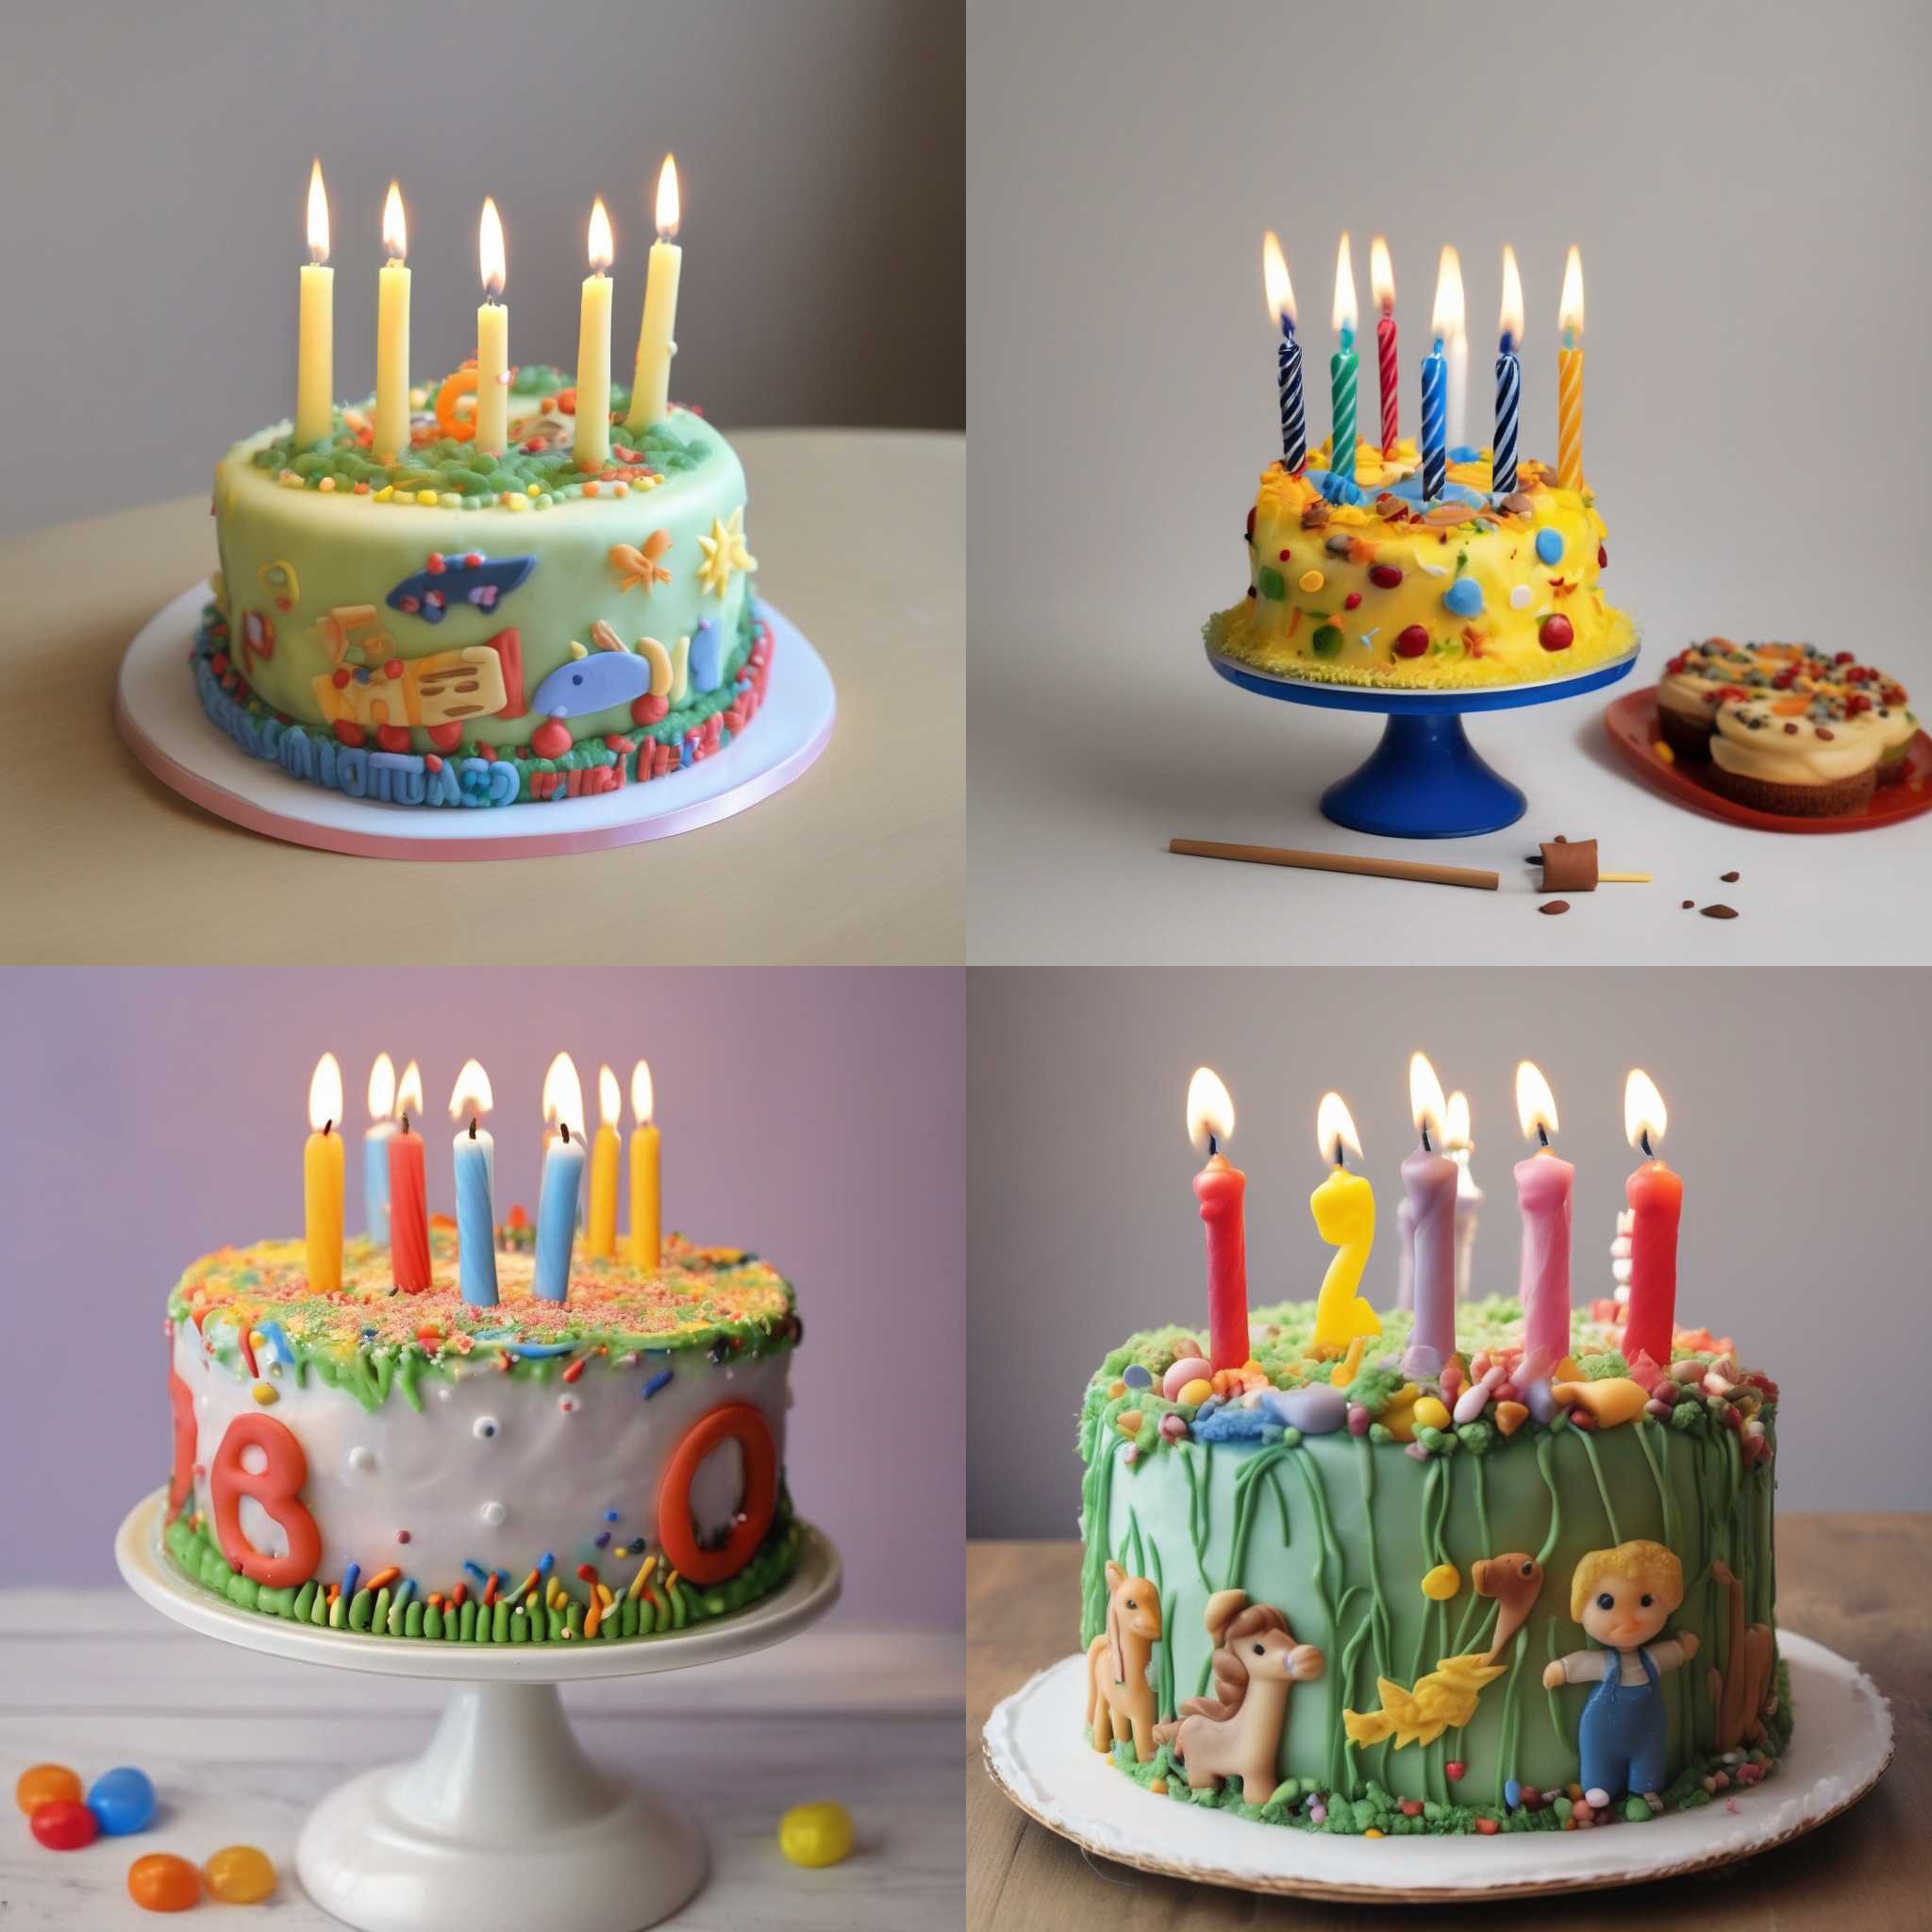 A two-year-old kid's birthday cake with taper candles